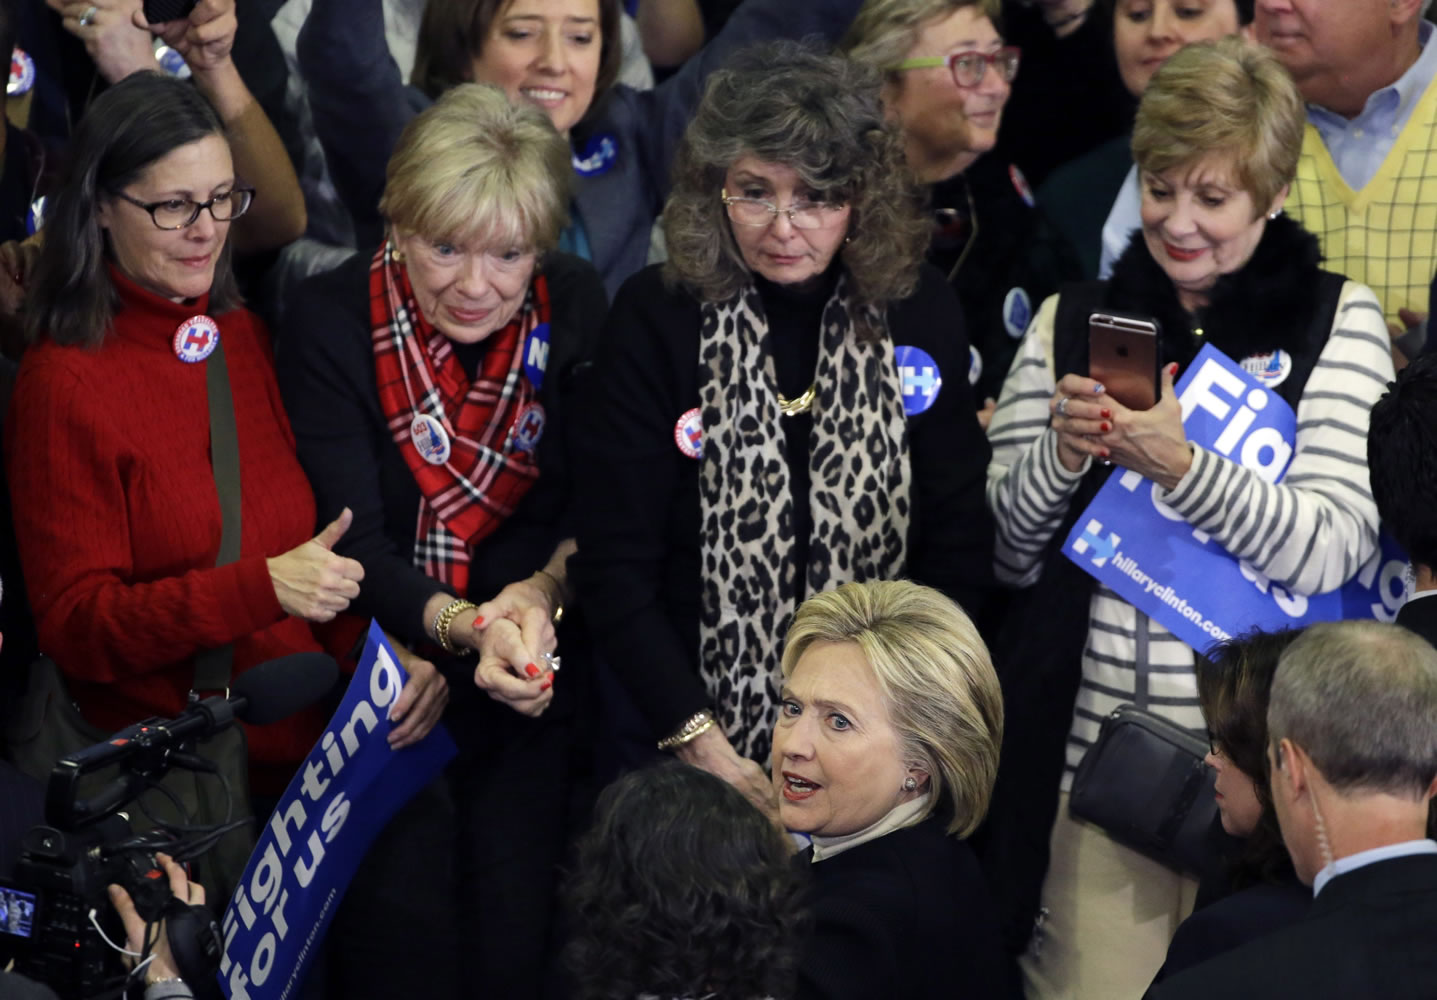 Democratic presidential candidate Hillary Clinton mingles with supporters at her New Hampshire presidential primary campaign rally Tuesday in Hooksett, N.H.